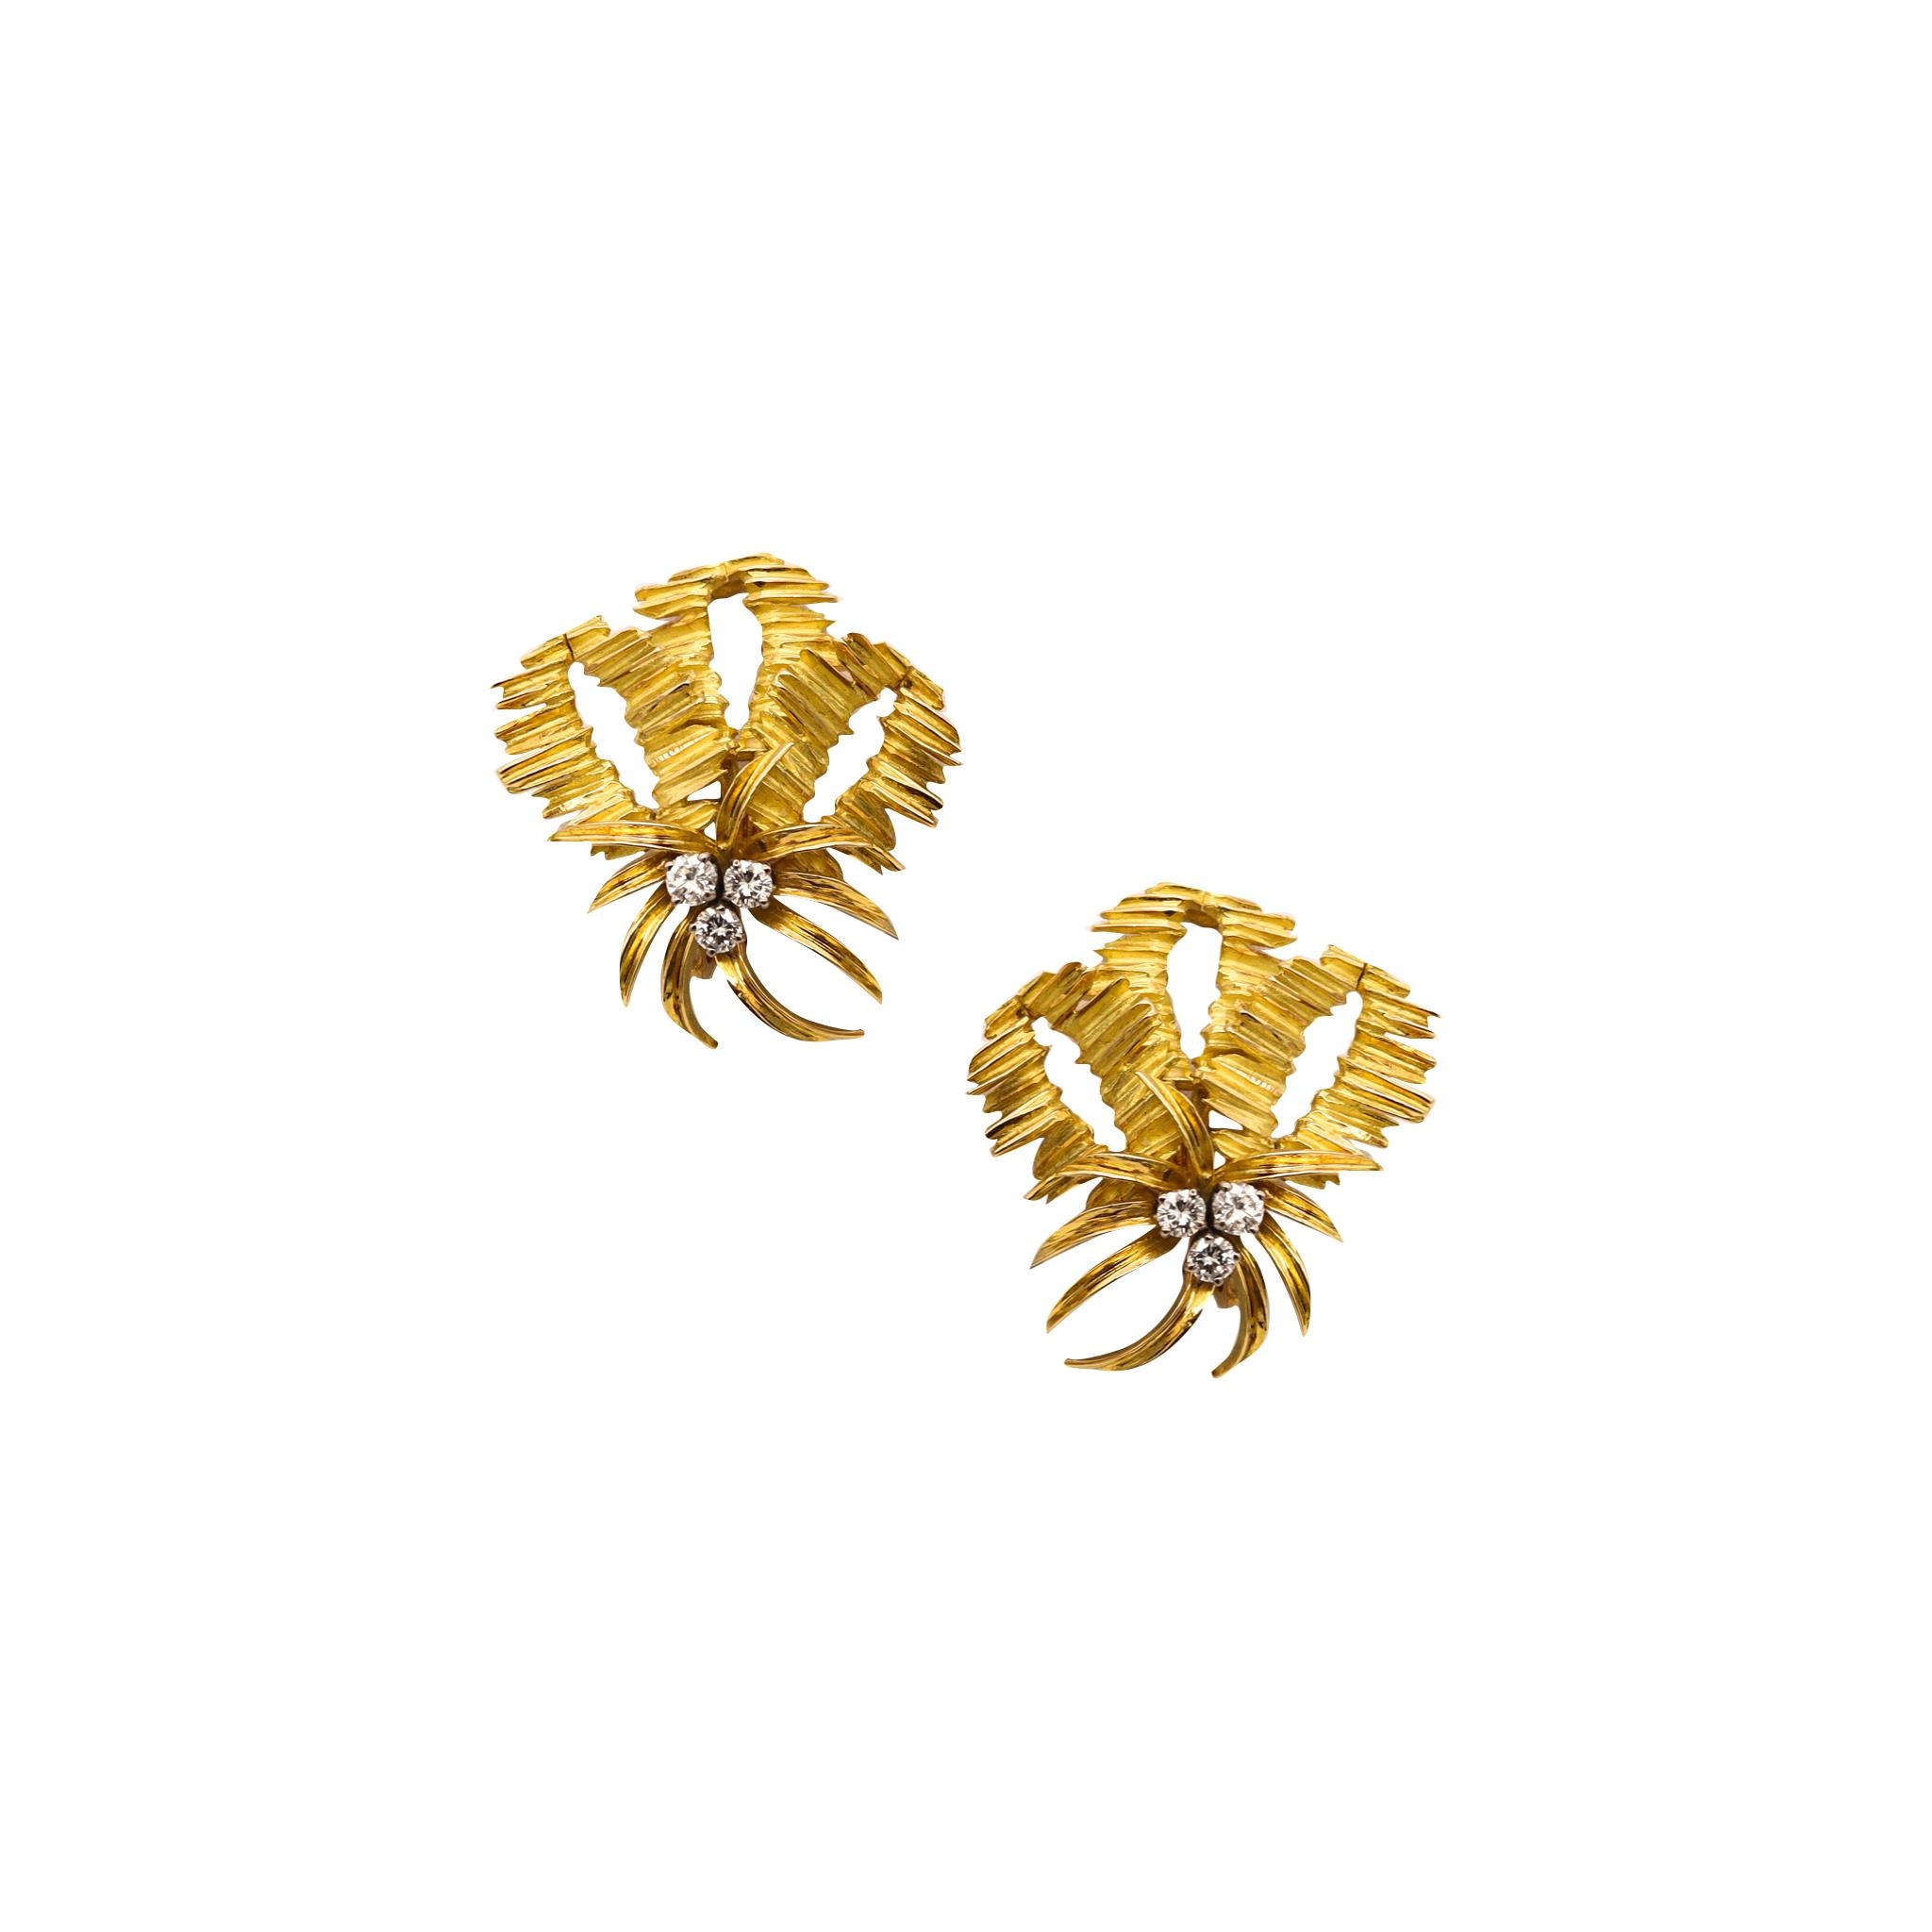 Textured Earrings designed by George L'Enfant.

Very Rare pieces, created in Paris France at the jewelry atelier of George L'Enfant, back in the 1960's. These earrings has been crafted in solid yellow gold of 18 karats, with textured patterns and